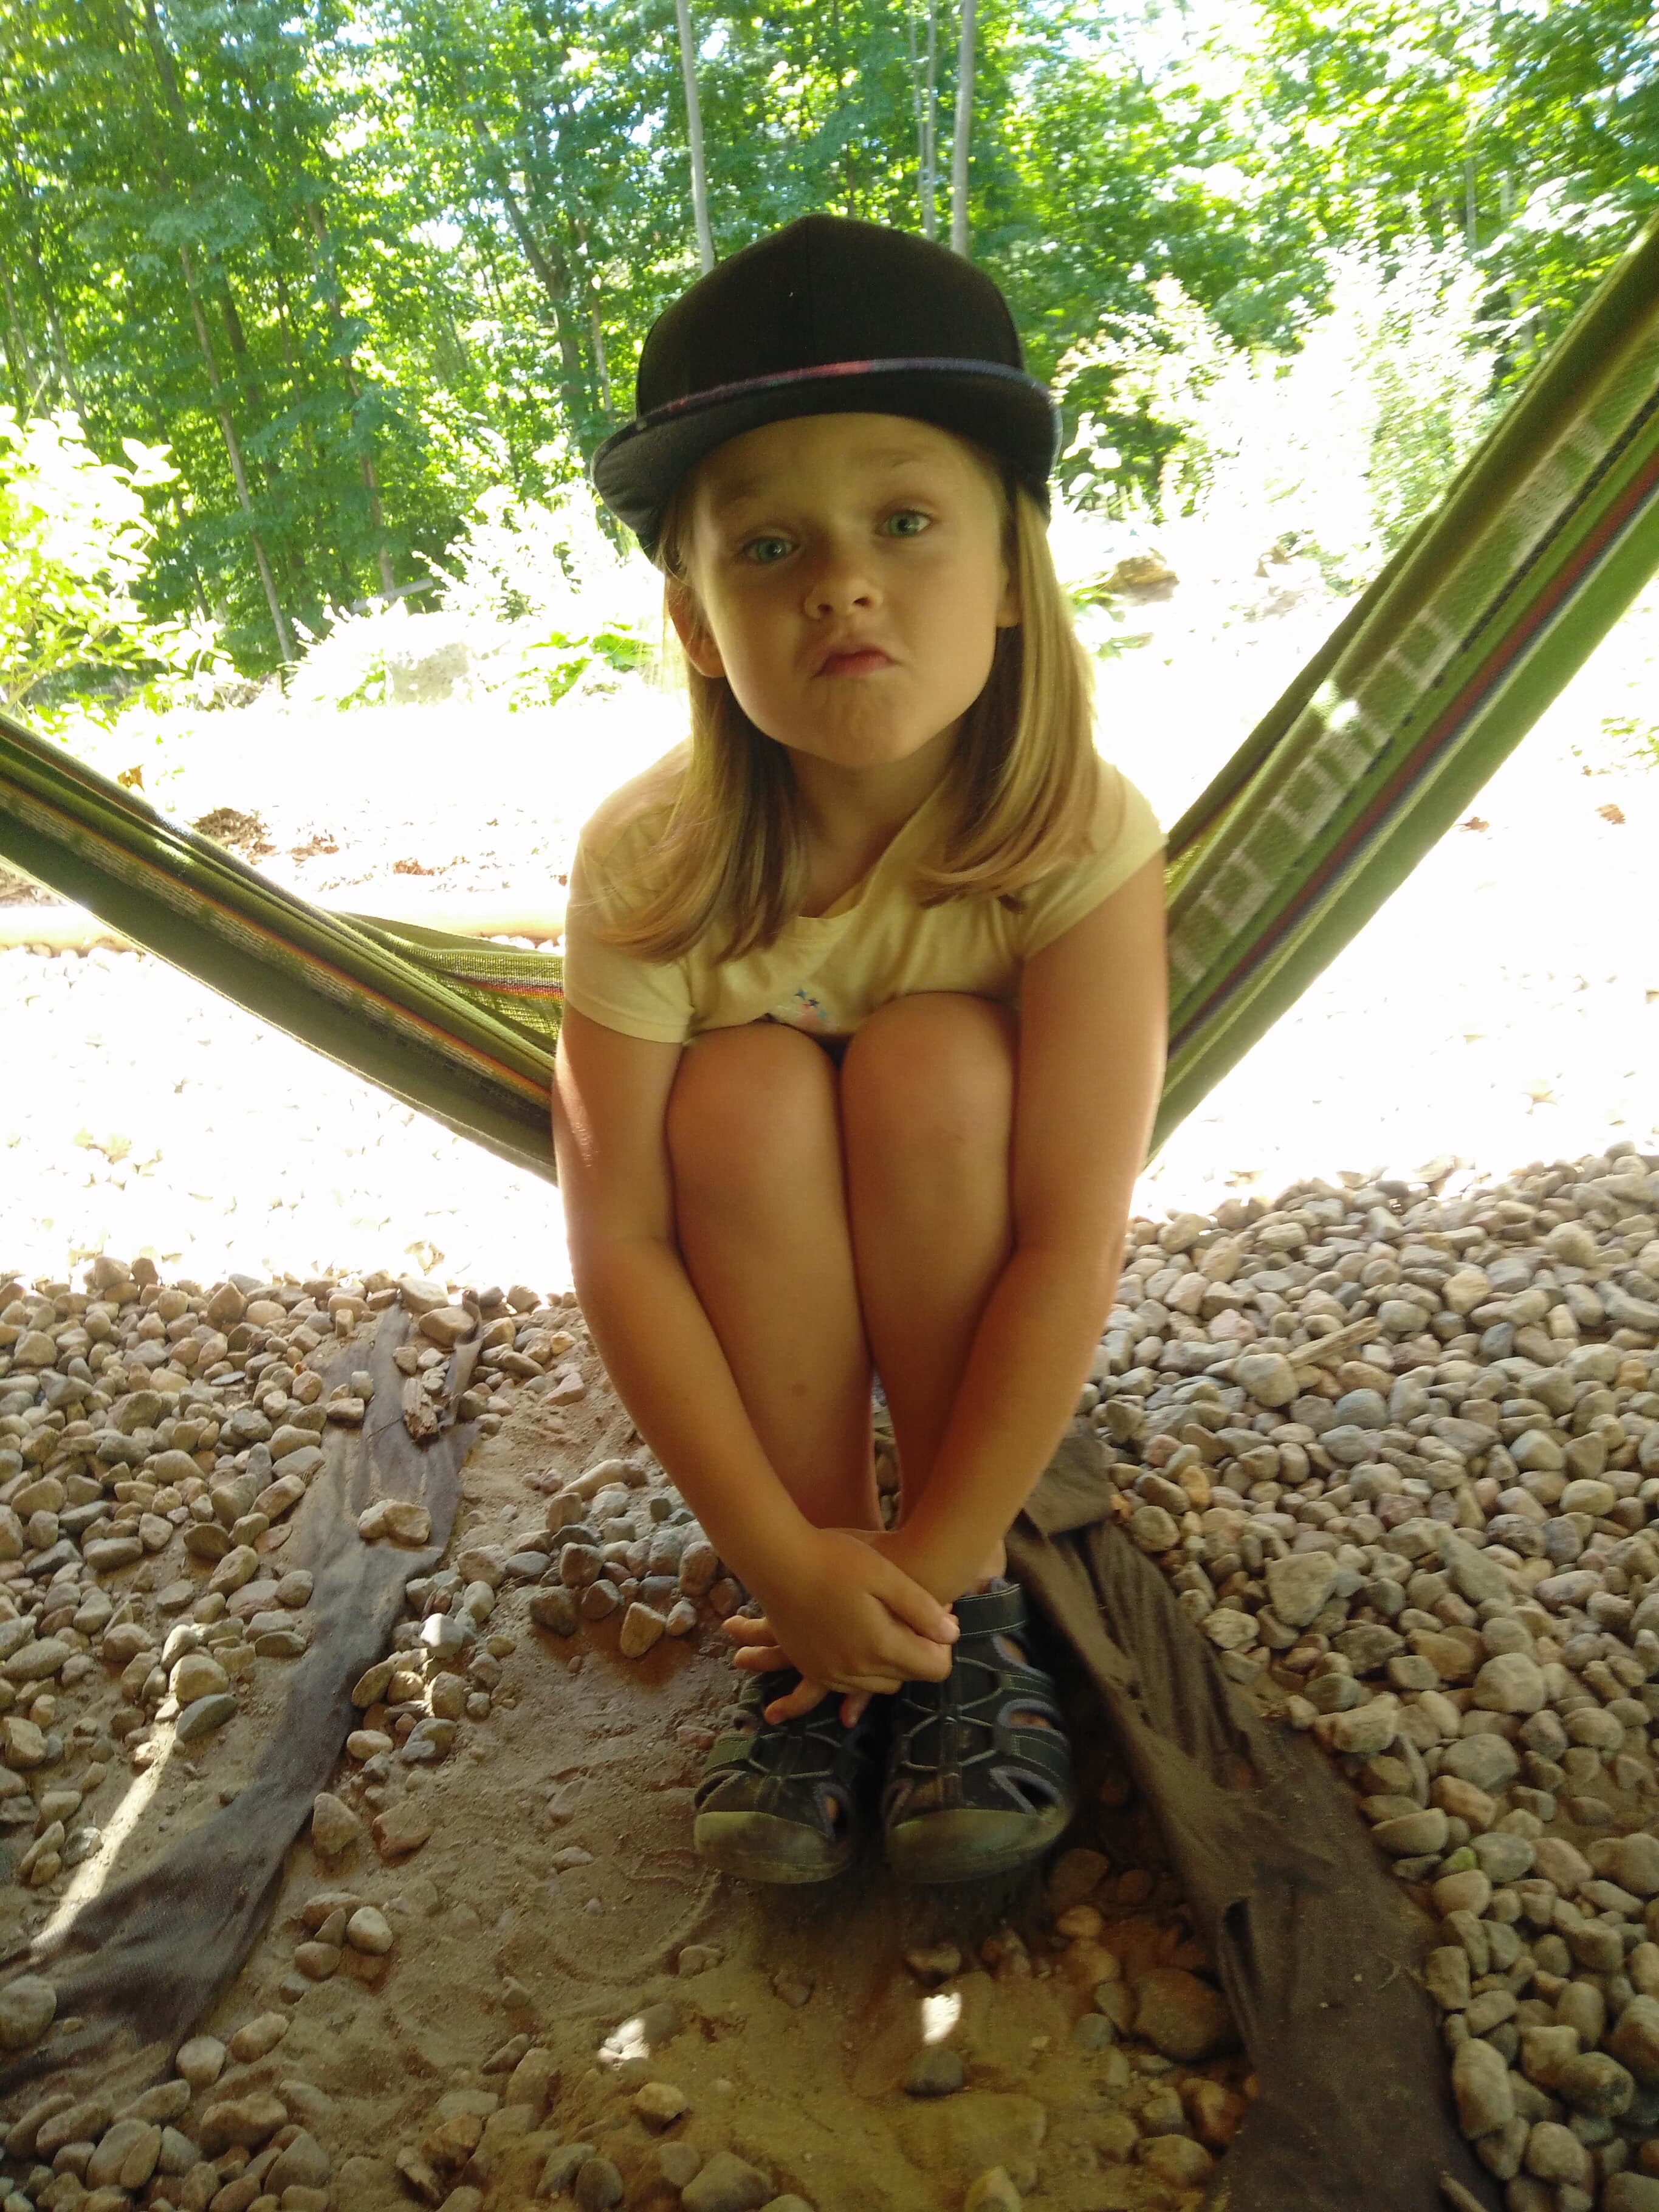 A 6 year old girl sits in a hammock and makes a silly face at the camera. 